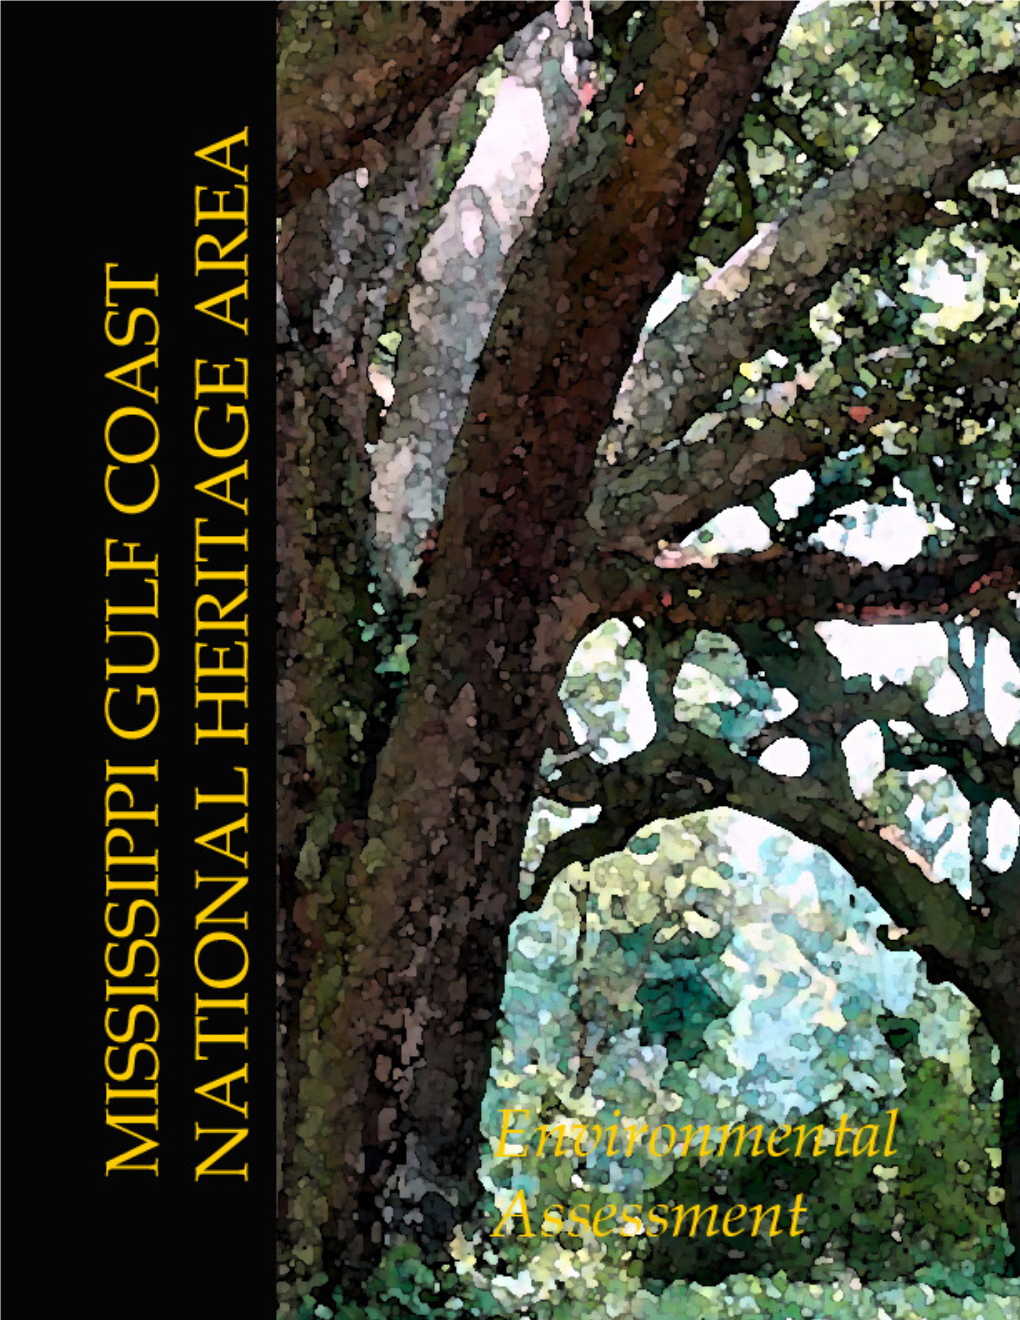 Mississippi Gulf Coast National Heritage Area Environmental Assessment